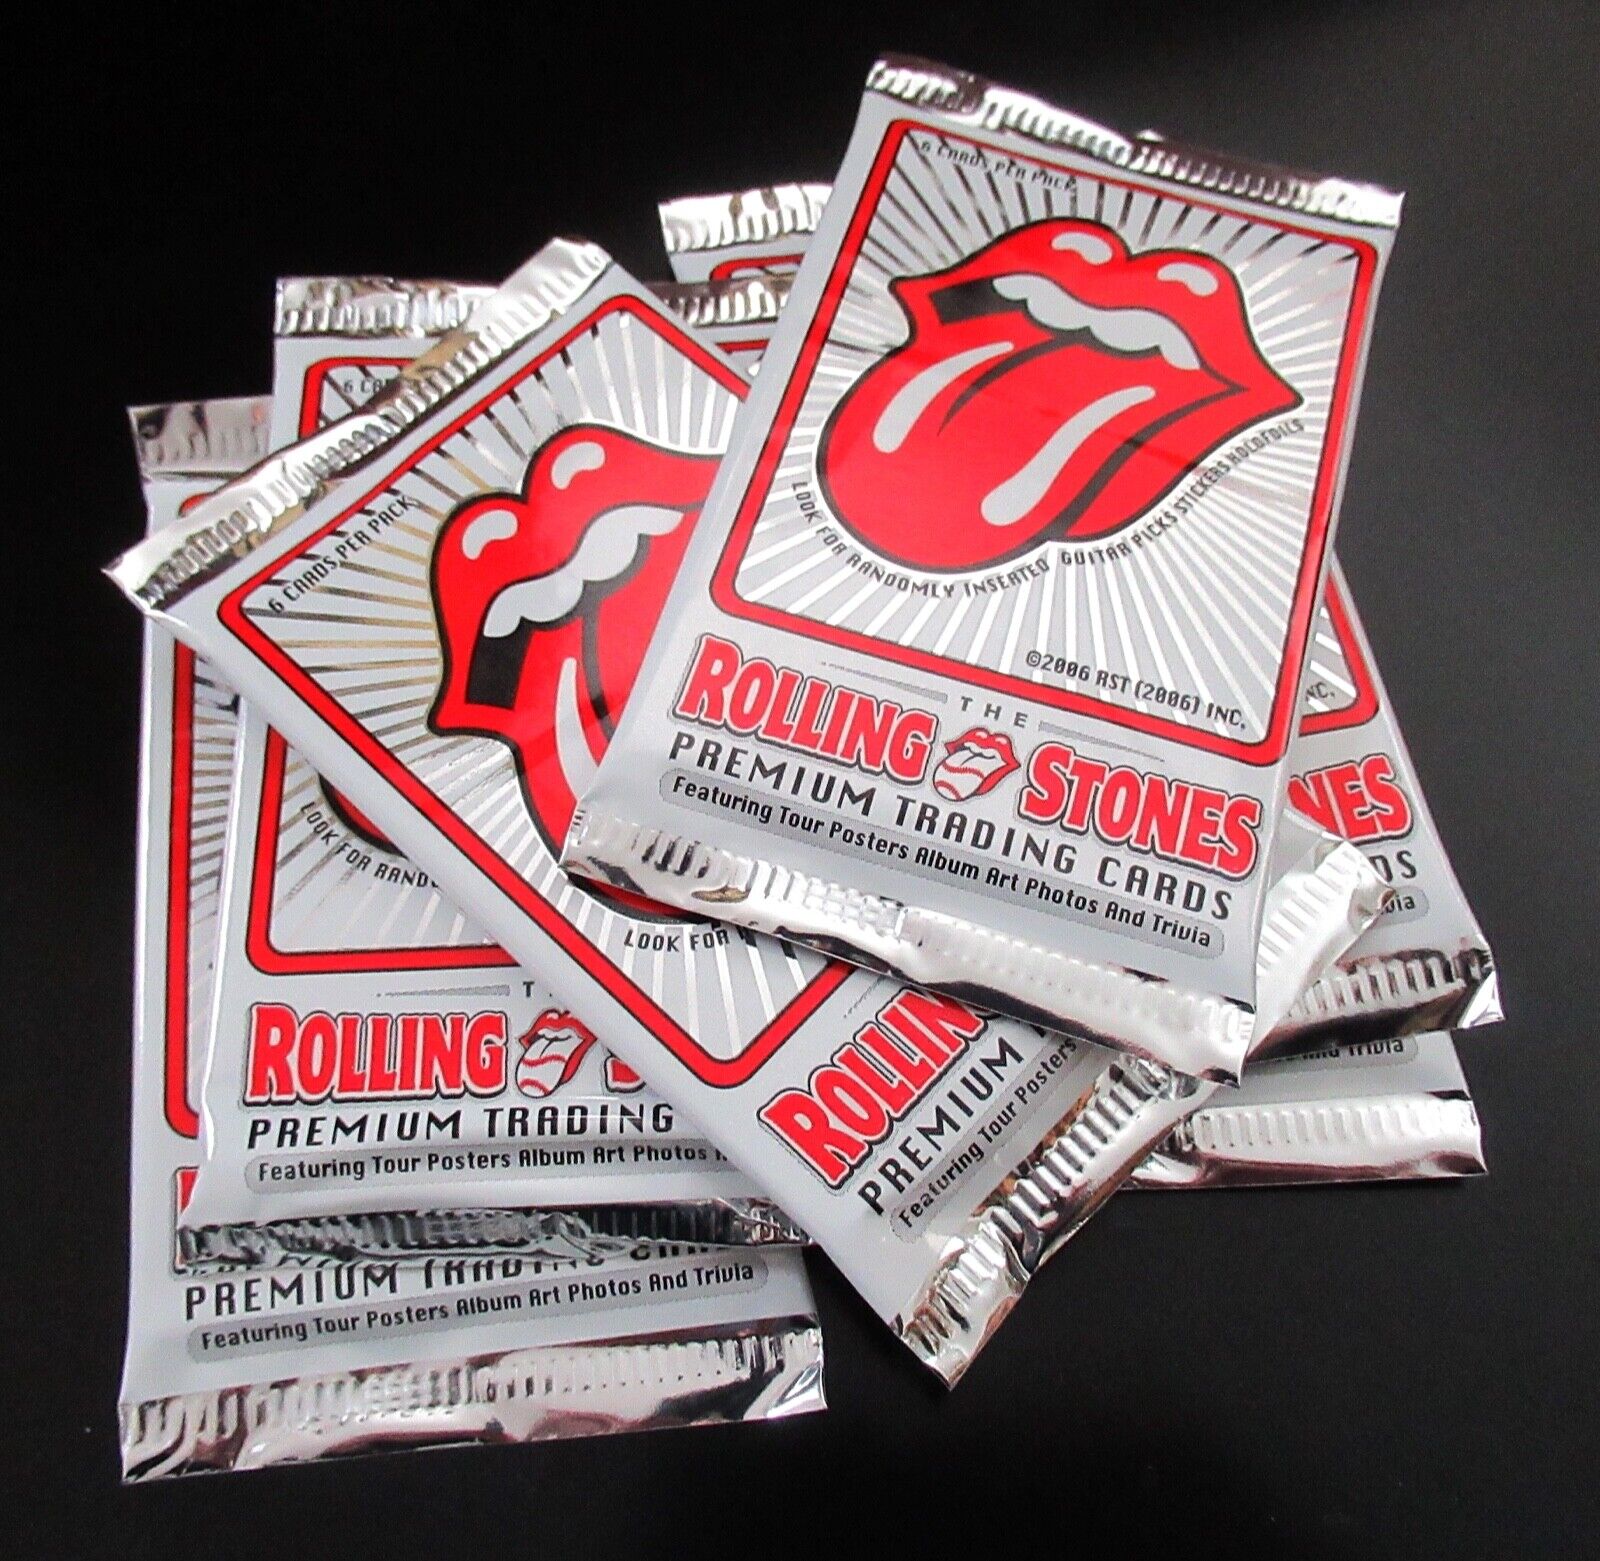 Rolling Stones Trading Cards 6-Pack Stickers Tattoos Guitar Picks Whosontour